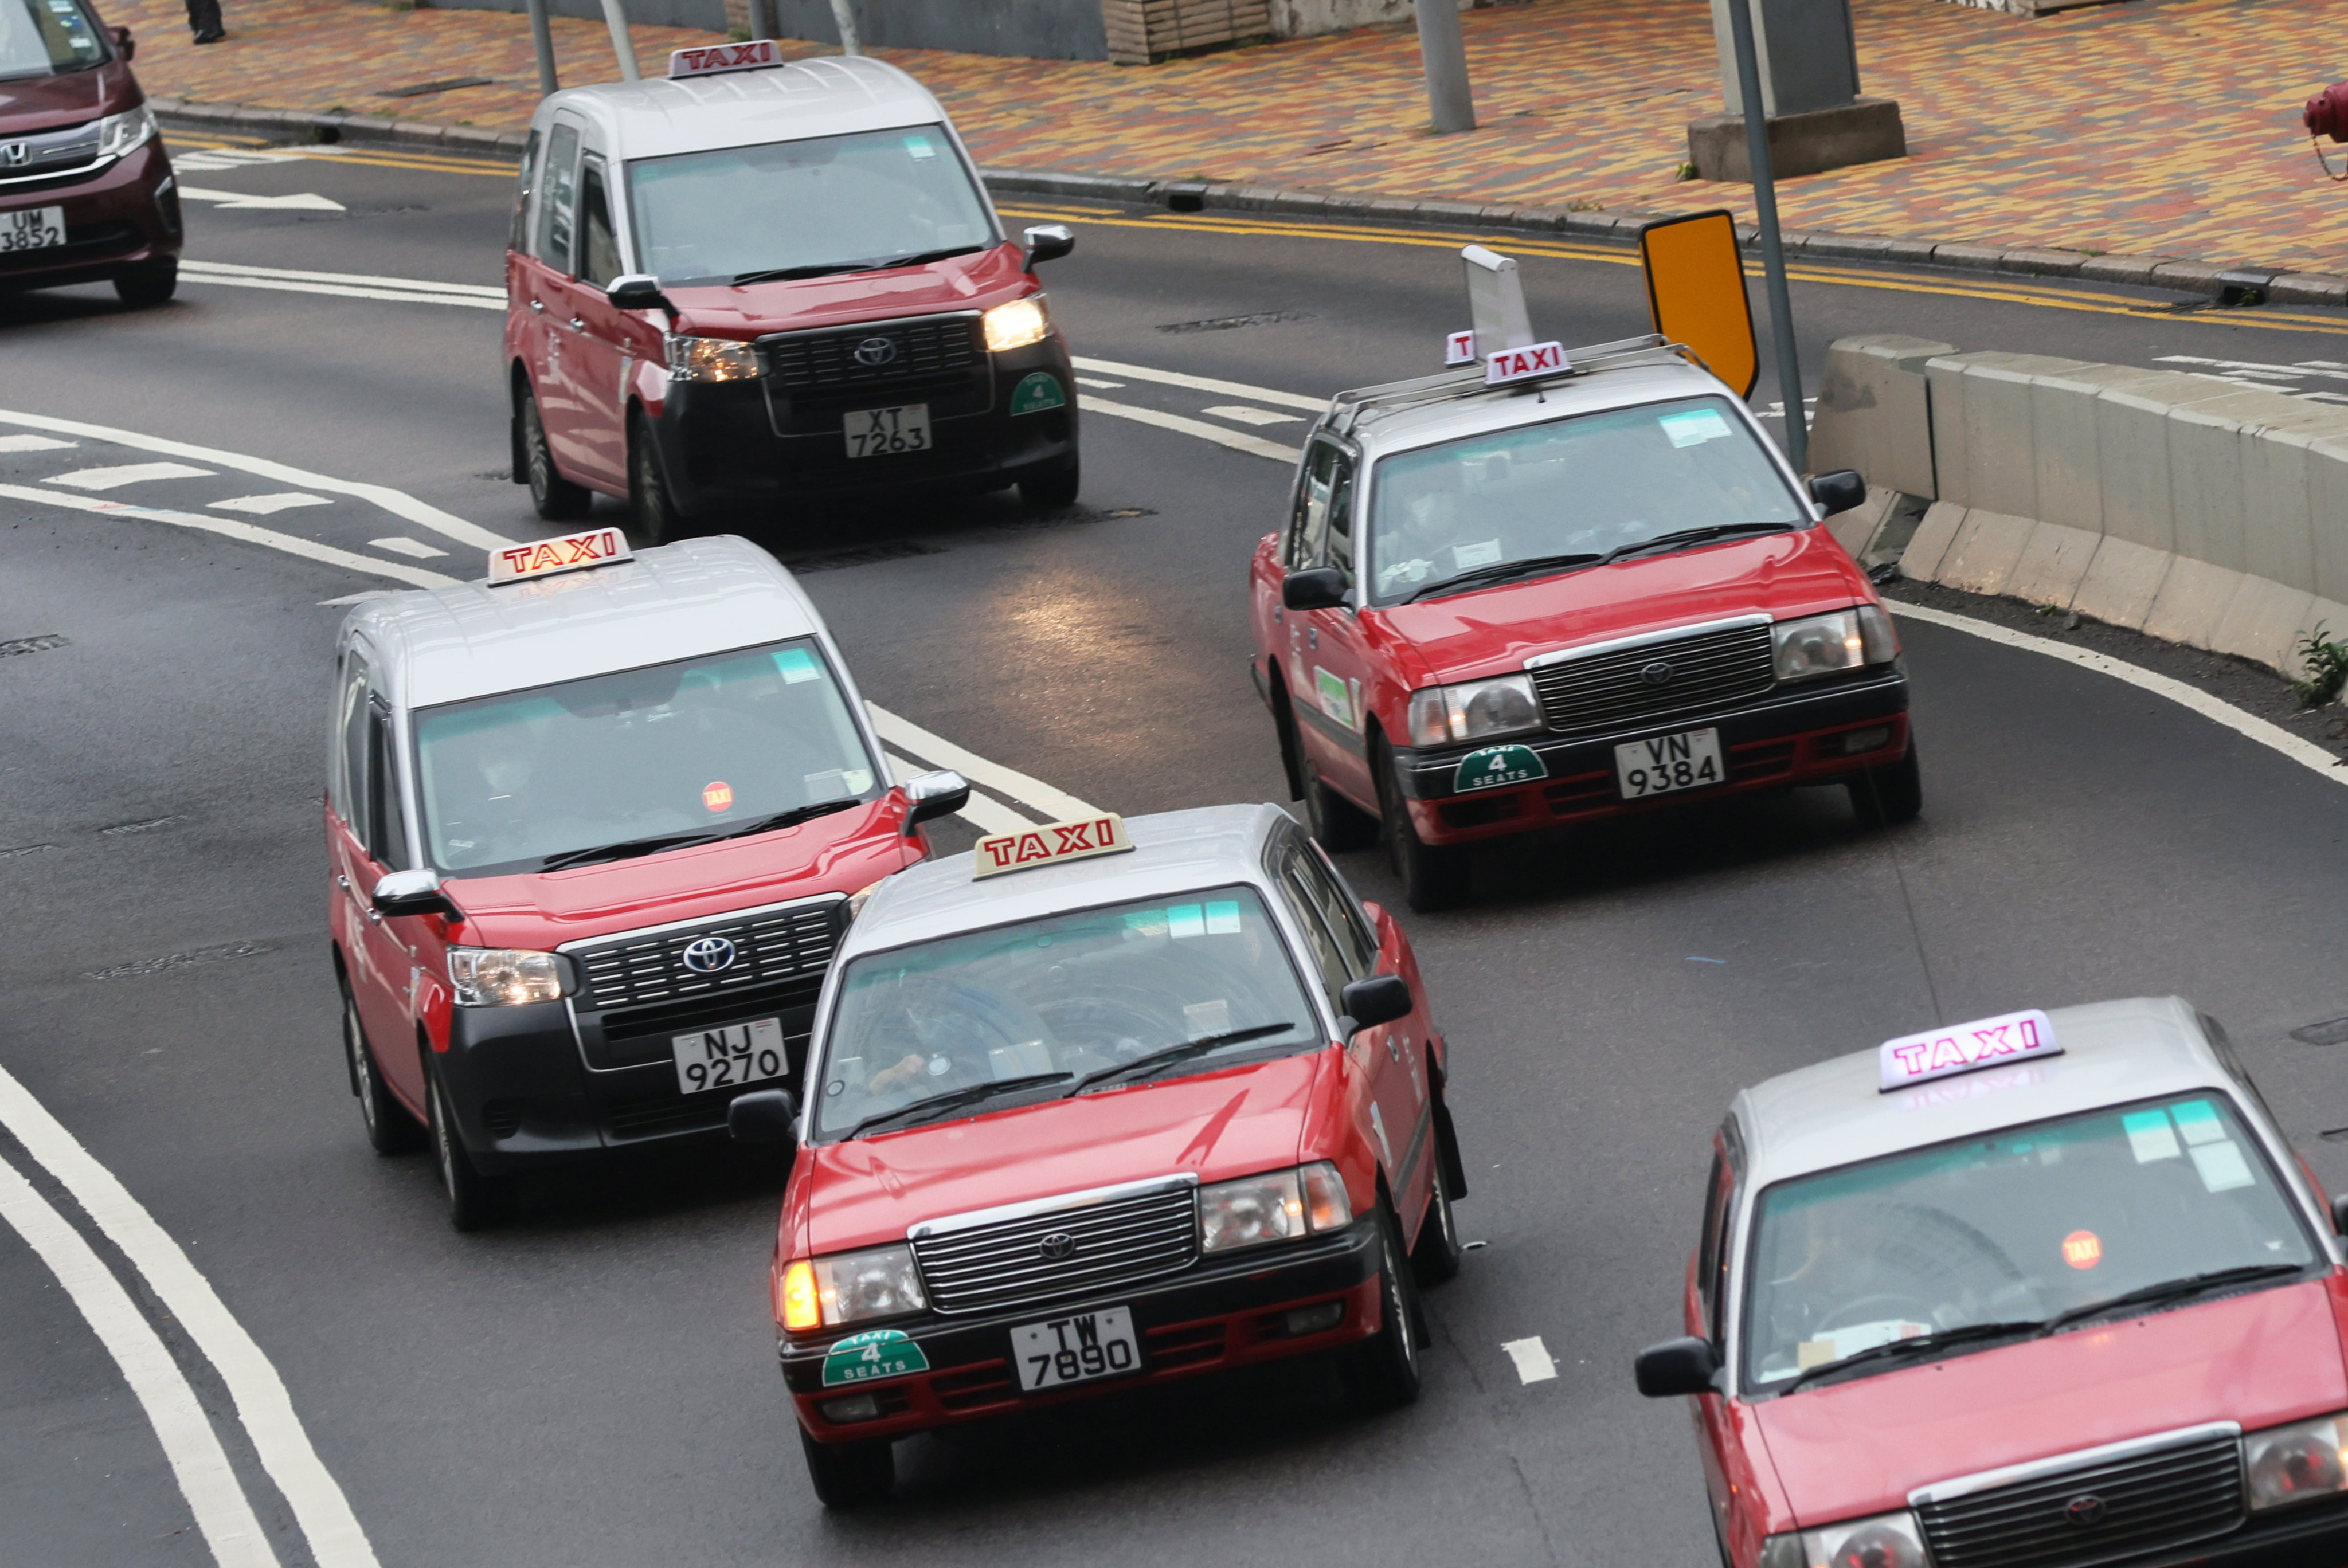 Hong Kong aims to increase the number of electric taxis operating in the city. Photo: Dickson Lee